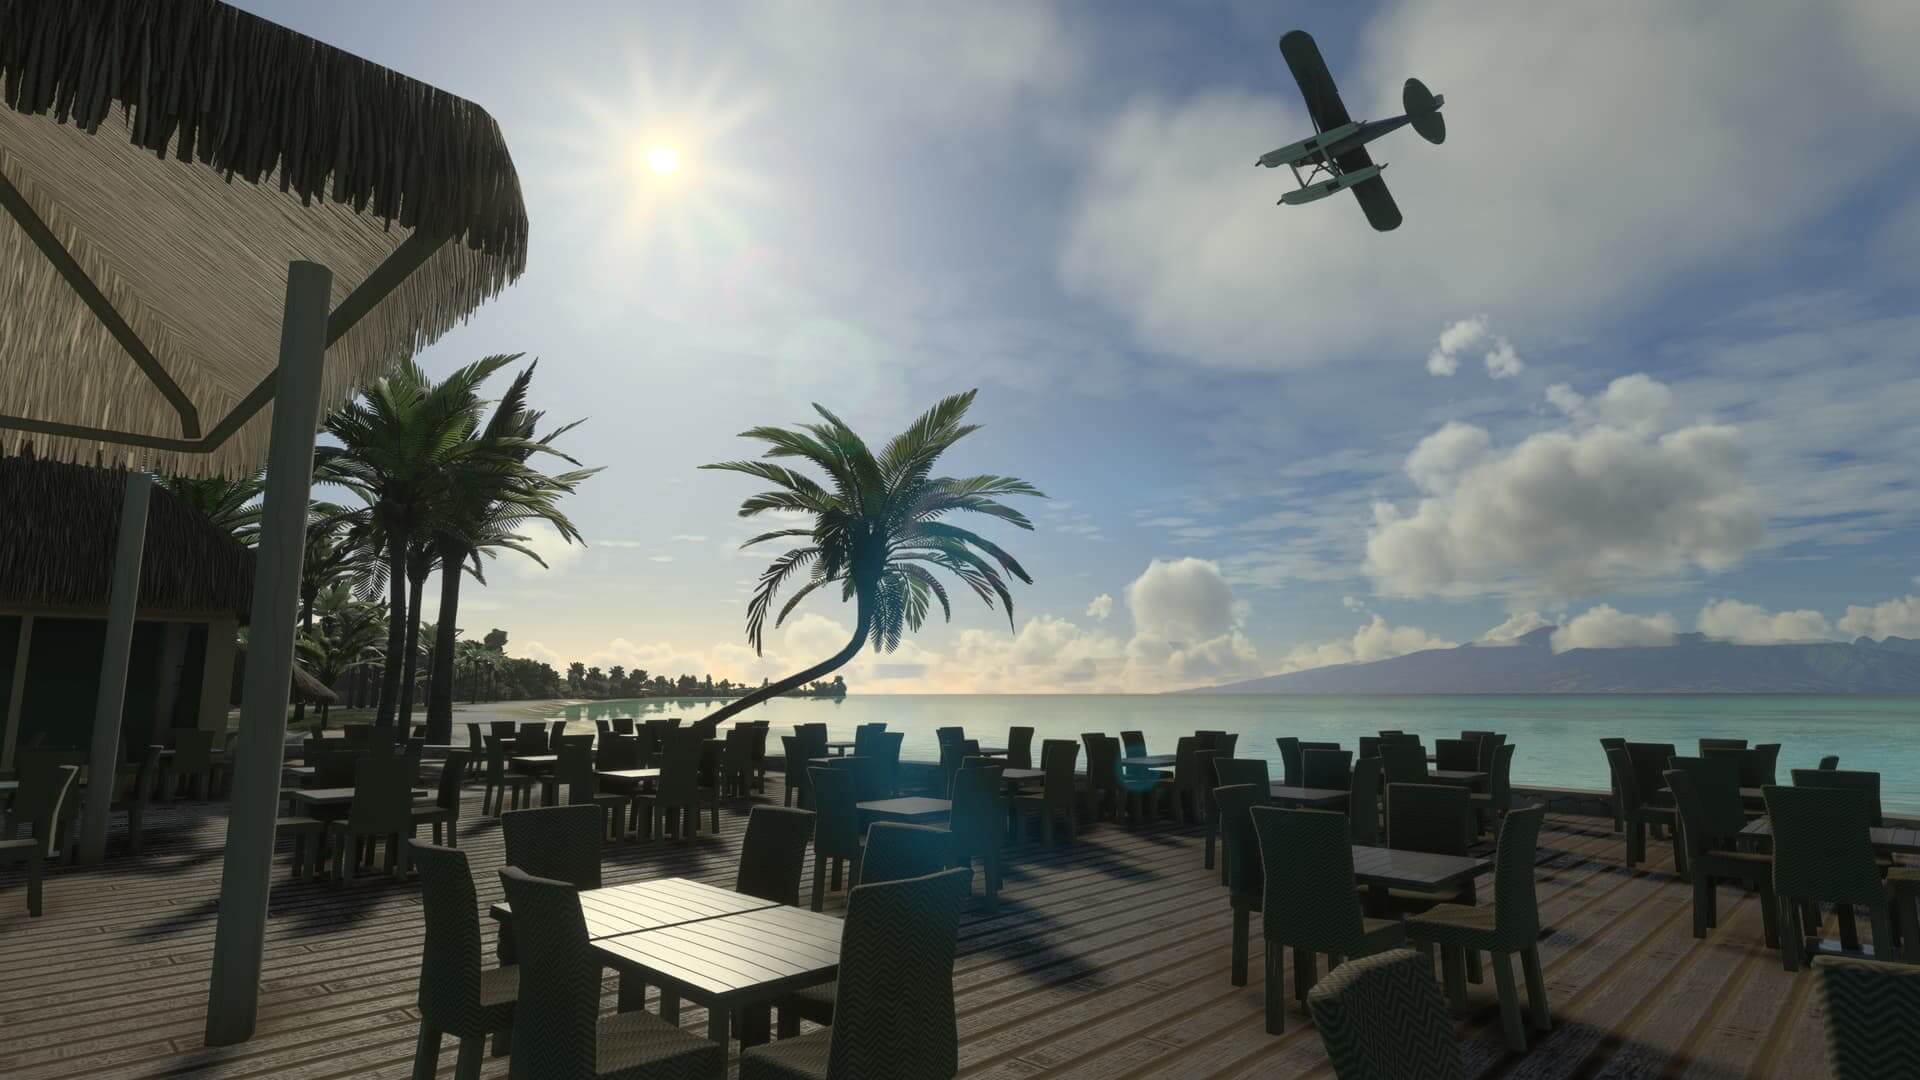 A plane with floats is in a steep banking turn as it flies above an outdoor resort restaurant. There are palm trees, a beach, and green/blue water in the background.